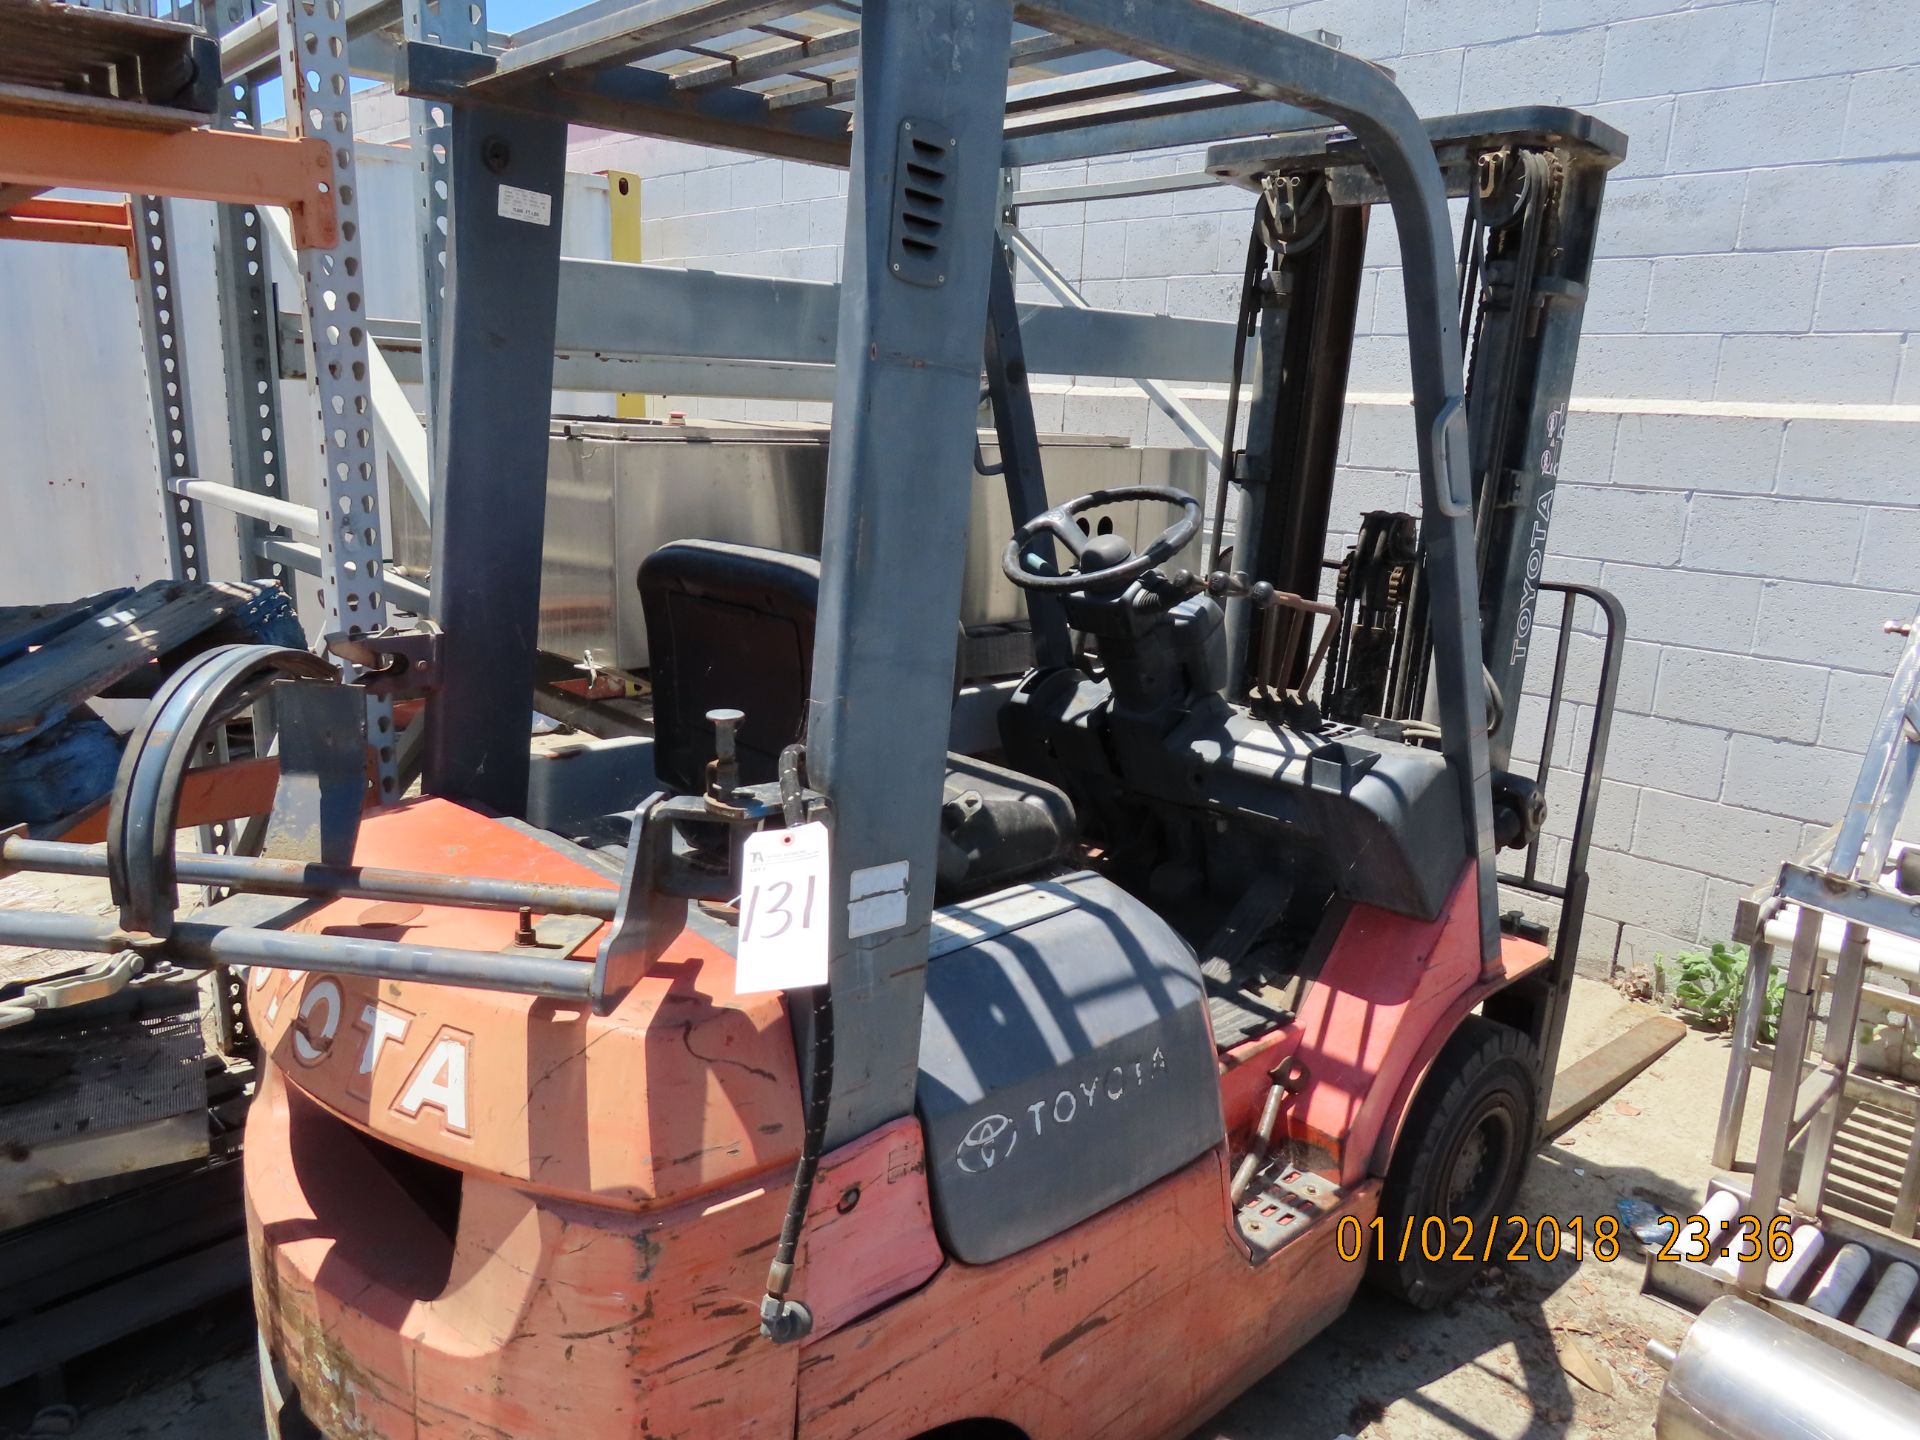 Toyota Mod. 7F6U18, LPG Forklift, 3-Stage, 5000lb. Cap (Needs Service)Loading Fee: $Call for Pricing